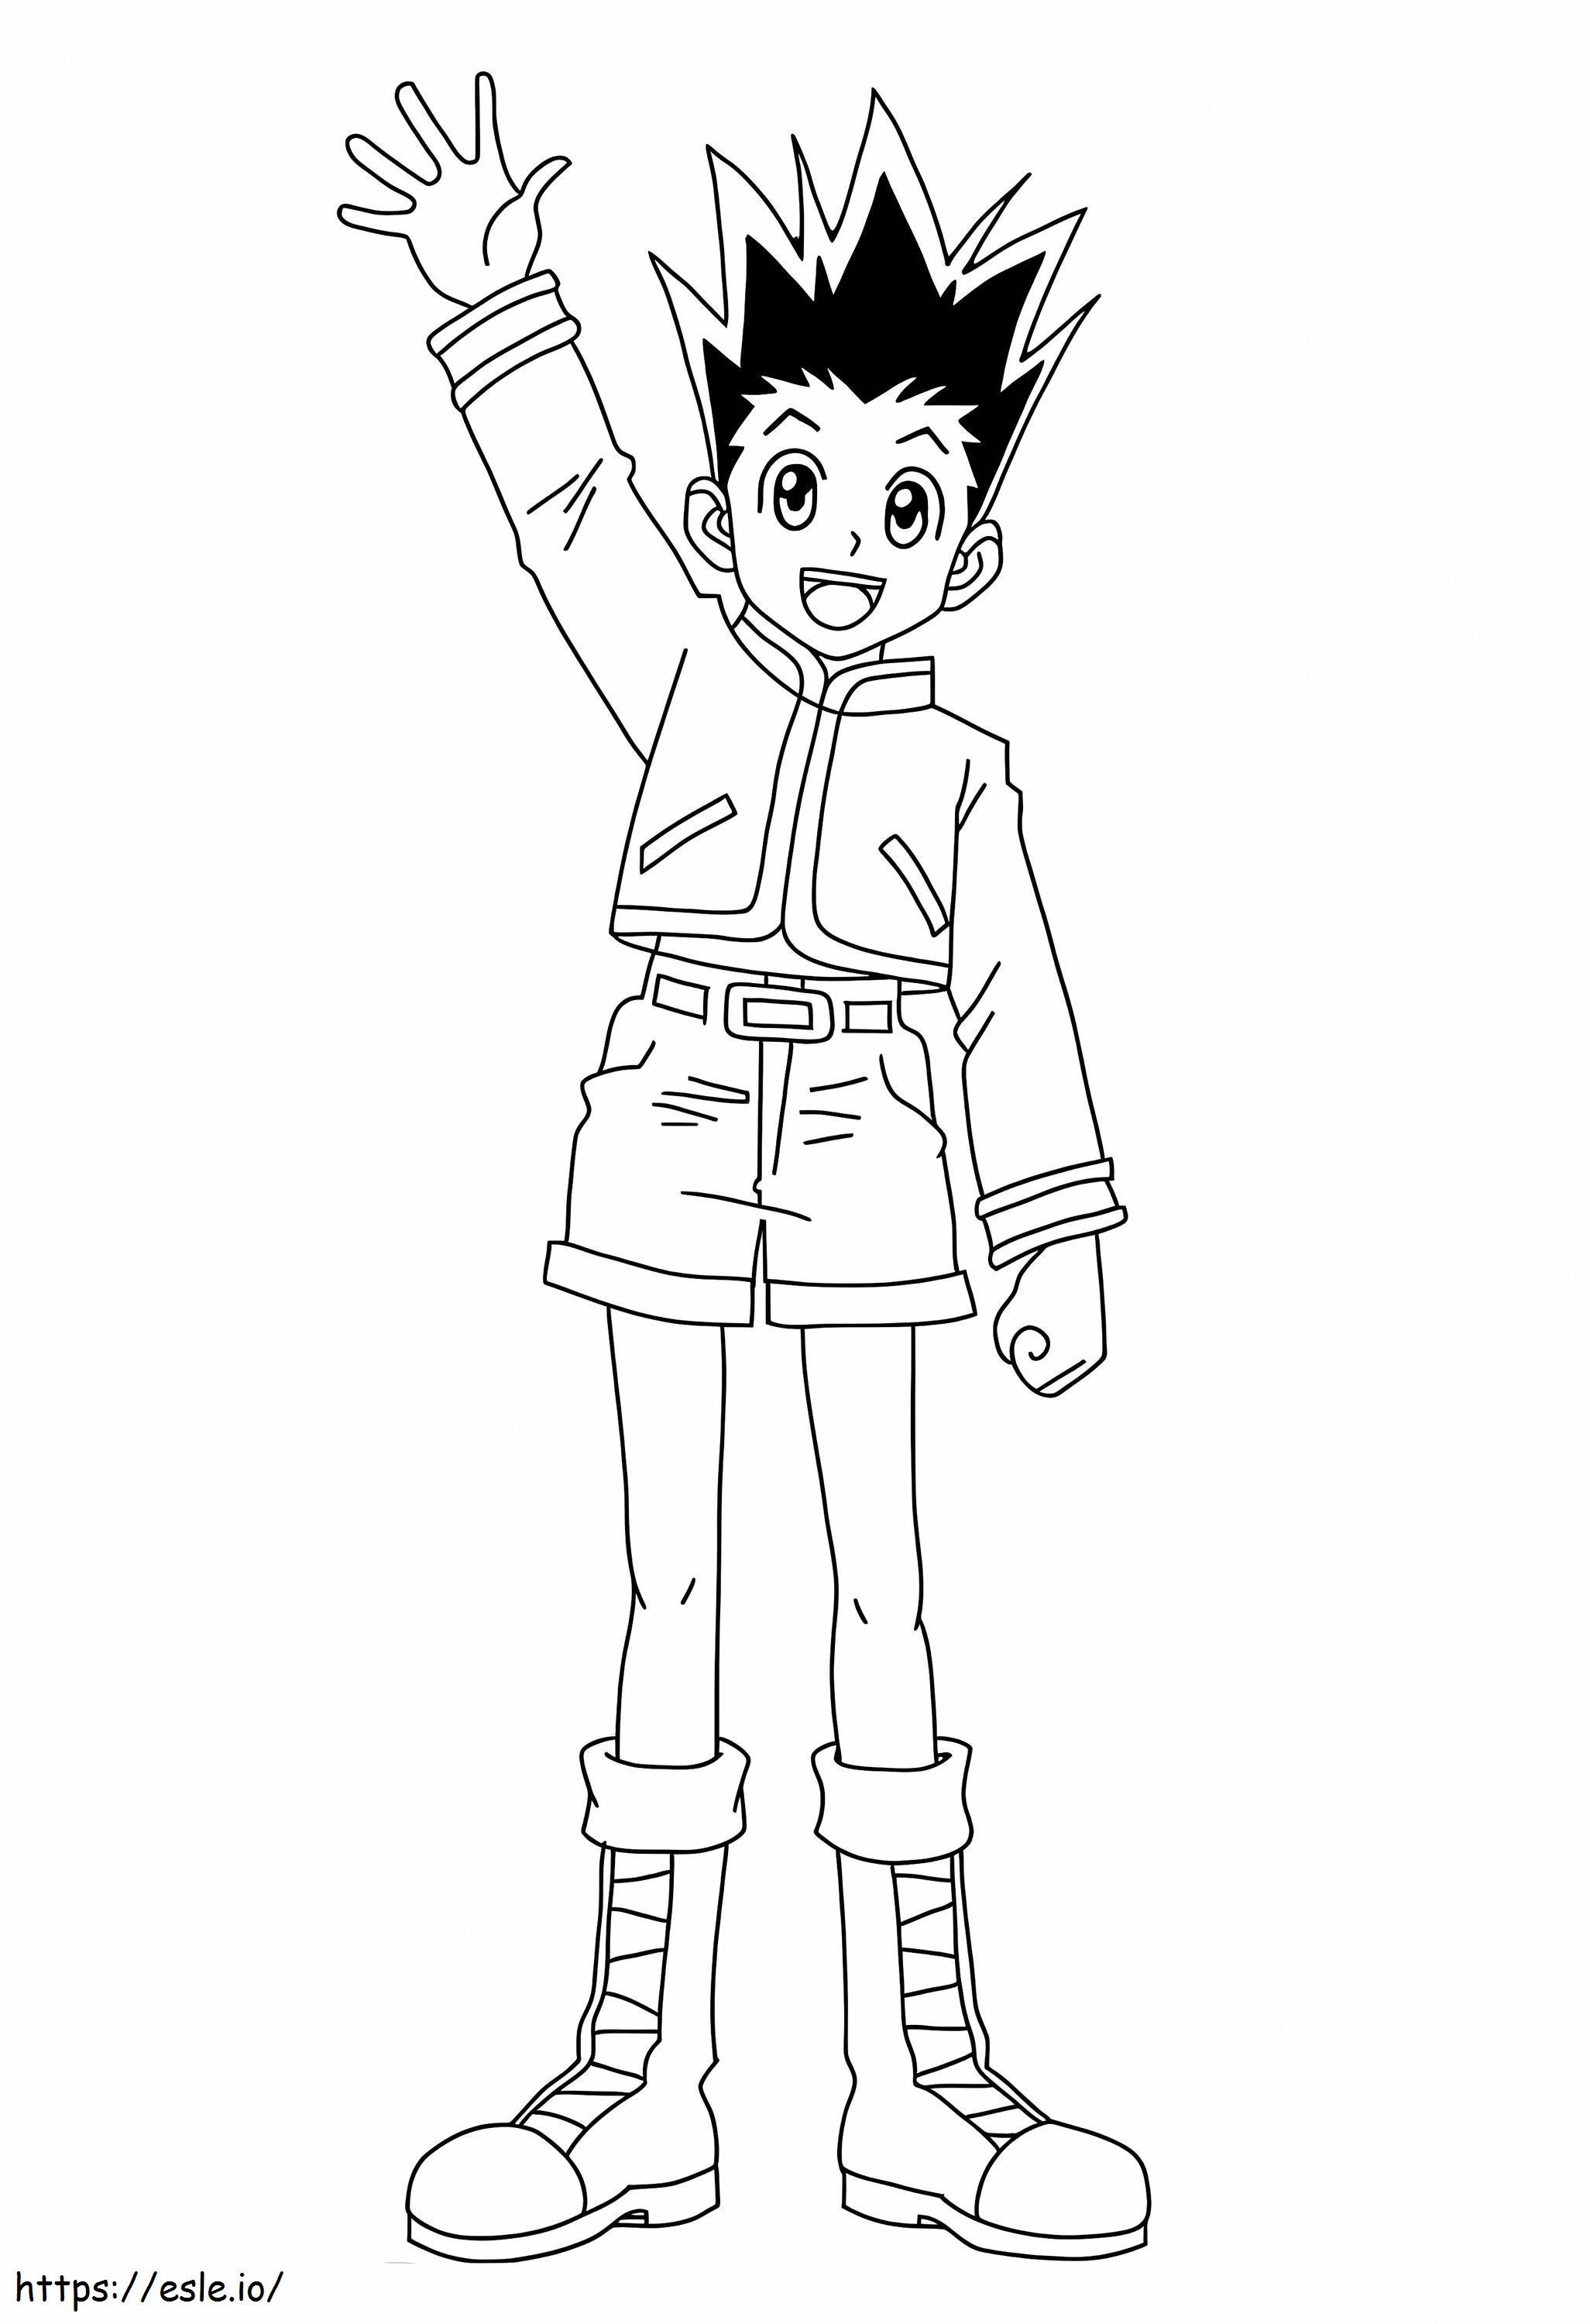 Gon From Hunter X Hunter coloring page